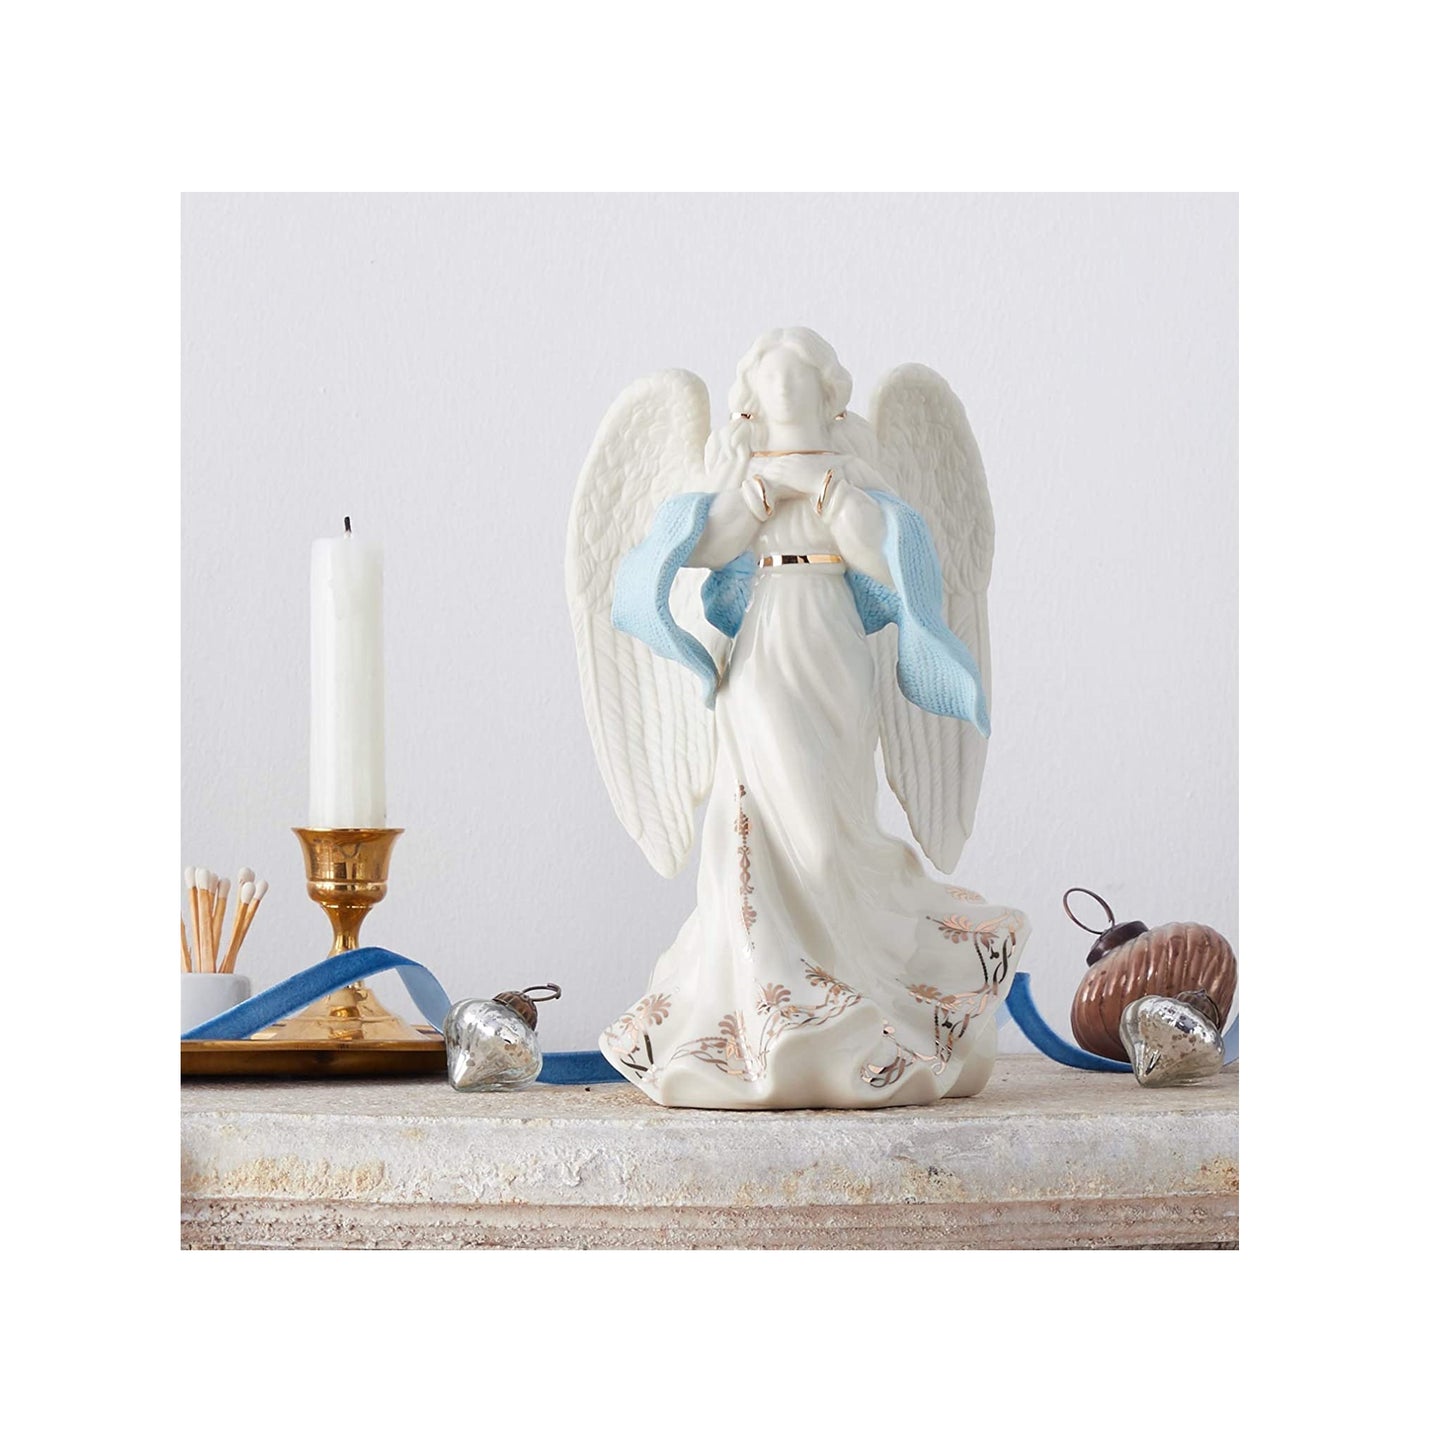 First Blessing Nativity Angel of Hope Figurine by Lenox